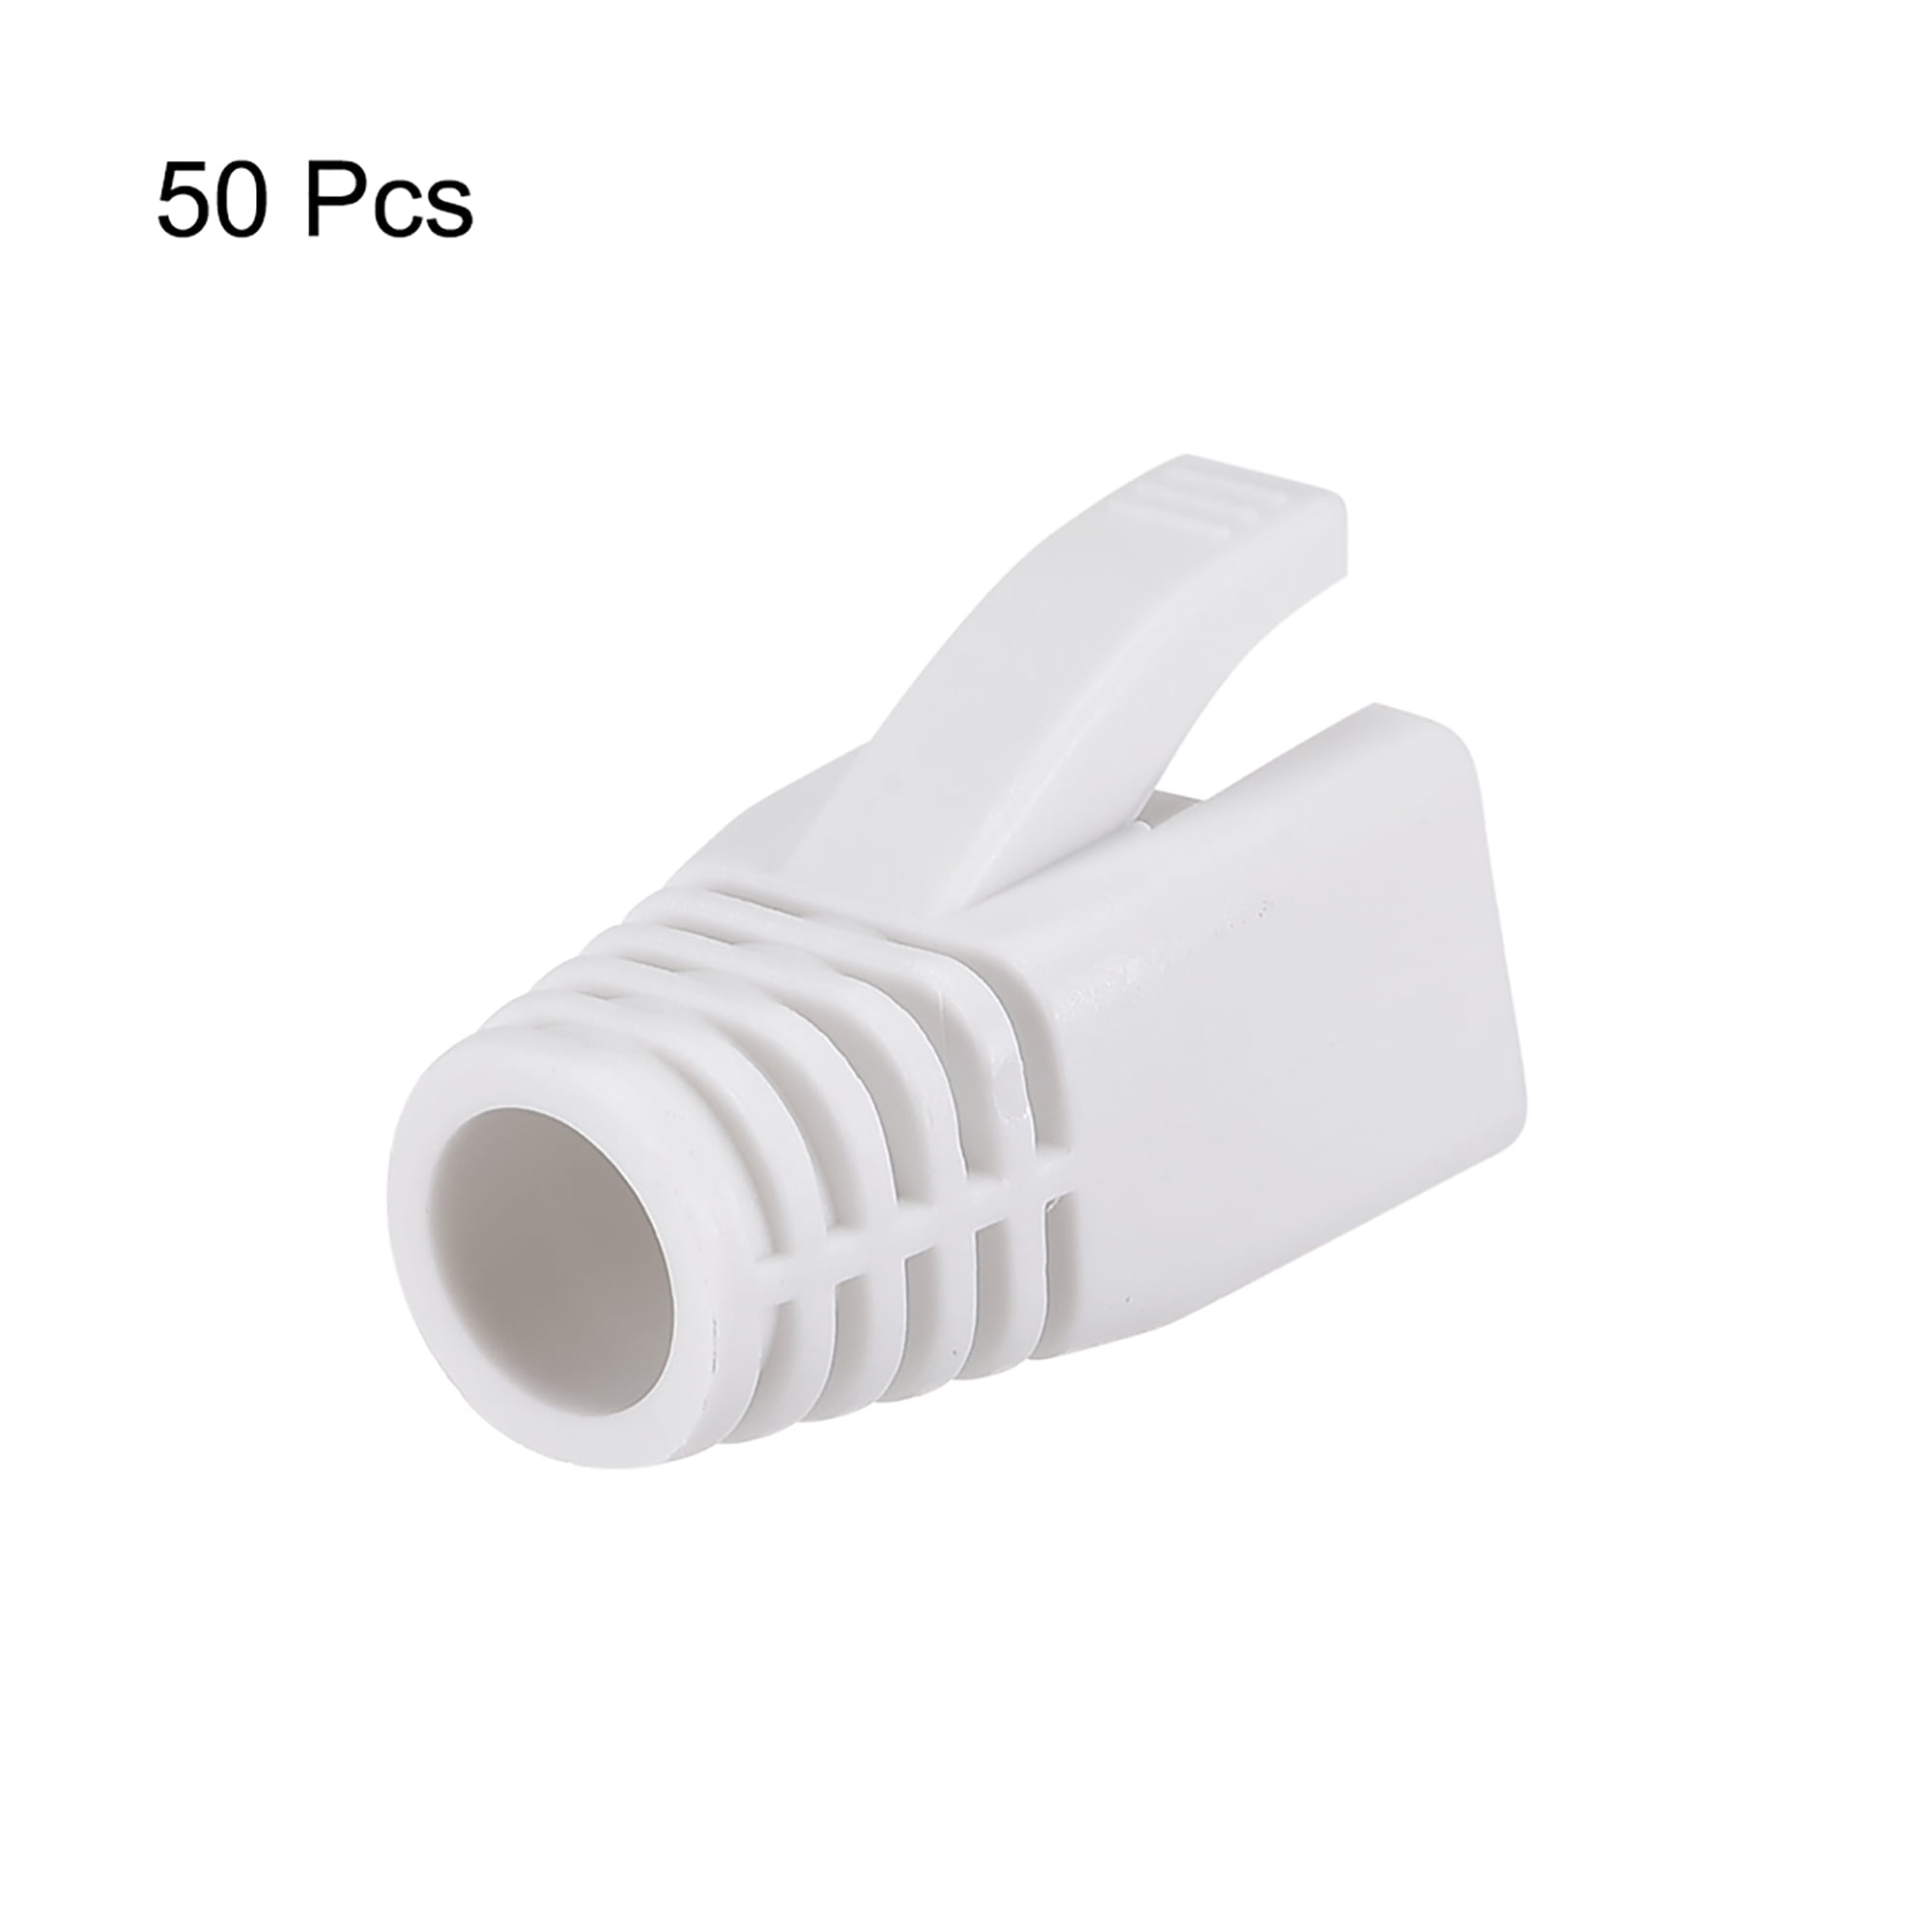 uxcell RJ45 Boots Cover Anti Dust Protector for Network Cable CAT6 CAT7 7mm Hole Dia White Plastic 50Pcs